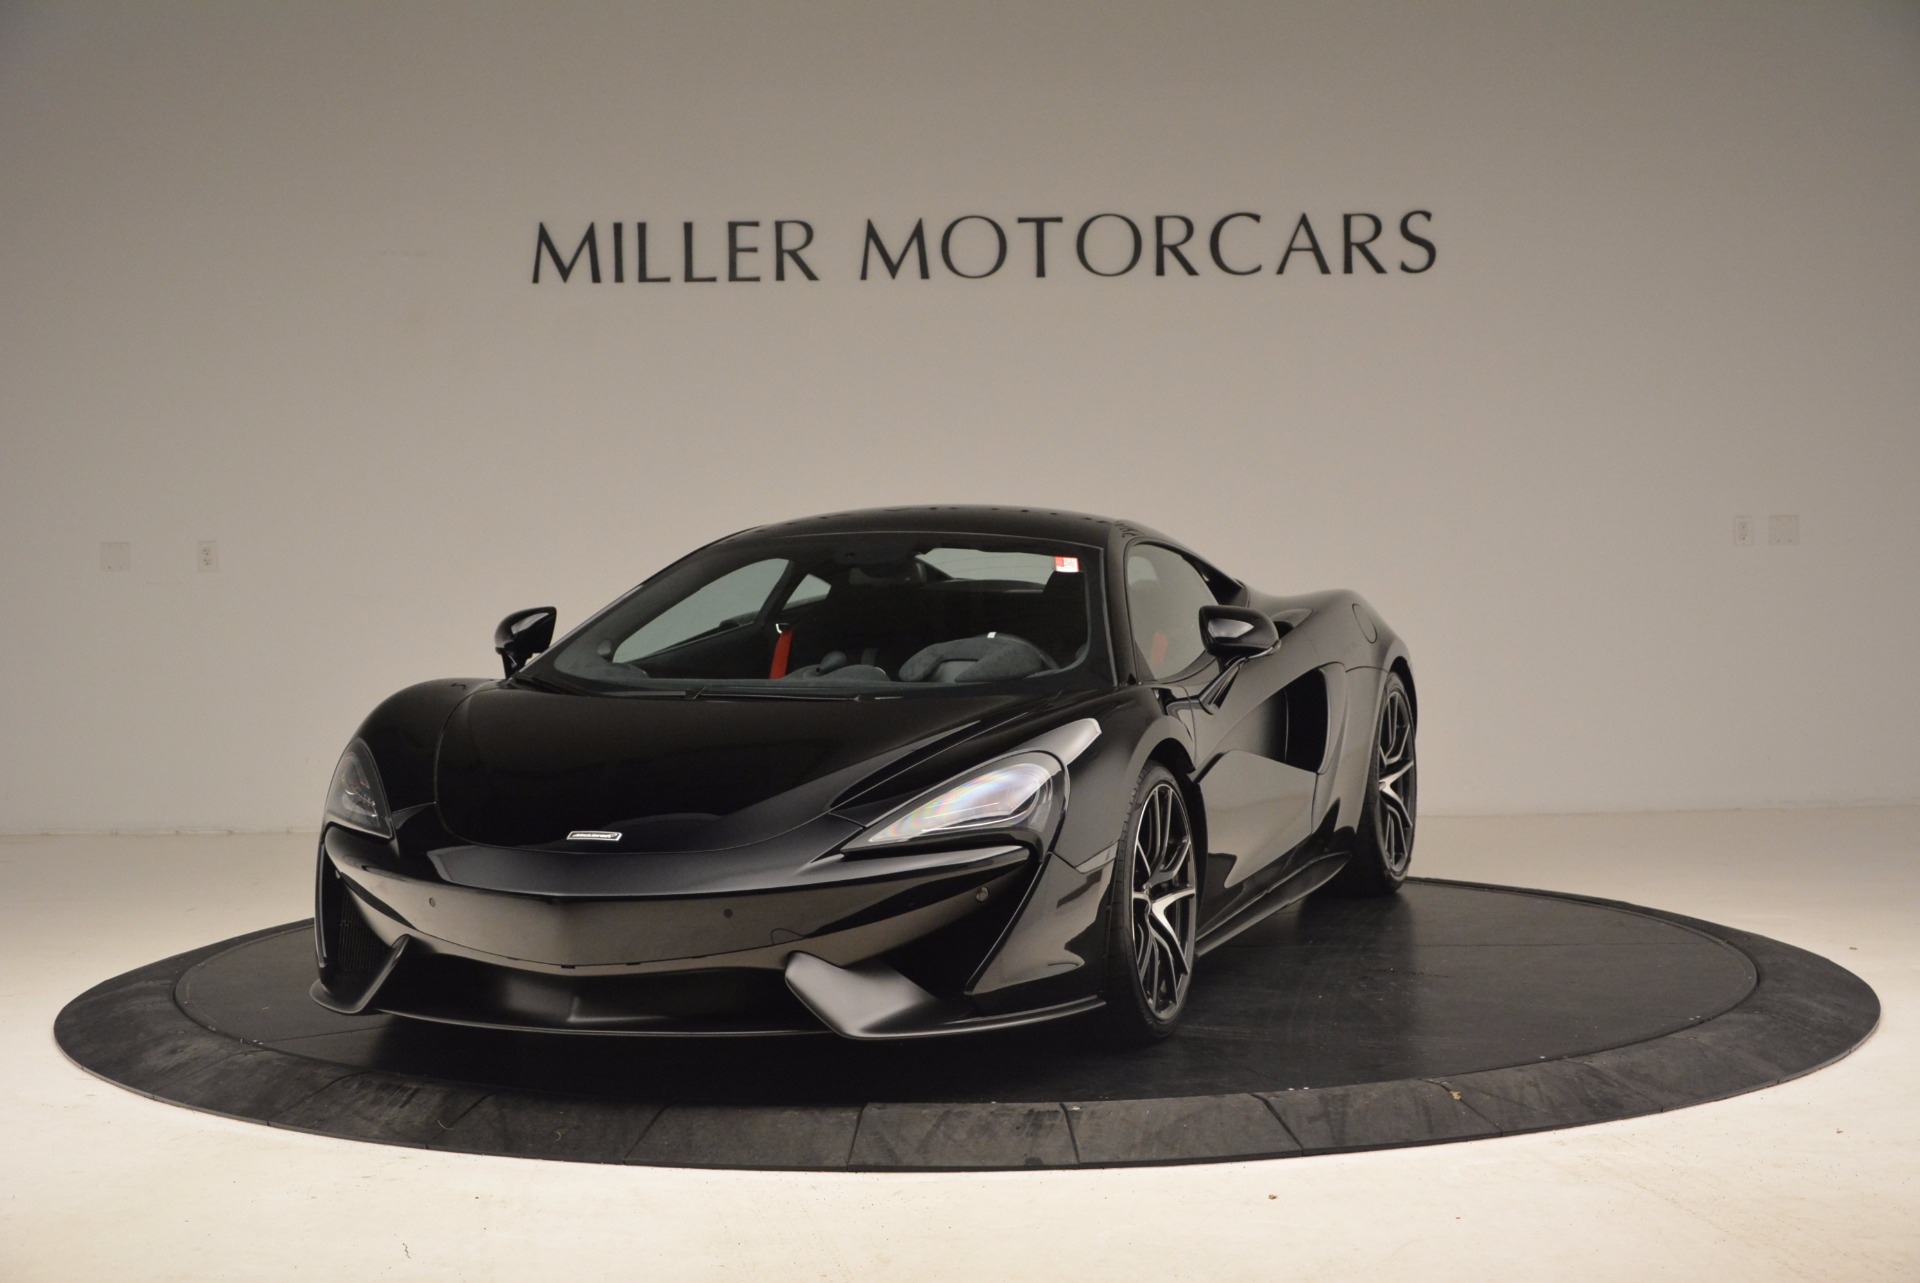 Used 2016 McLaren 570S for sale Sold at Rolls-Royce Motor Cars Greenwich in Greenwich CT 06830 1